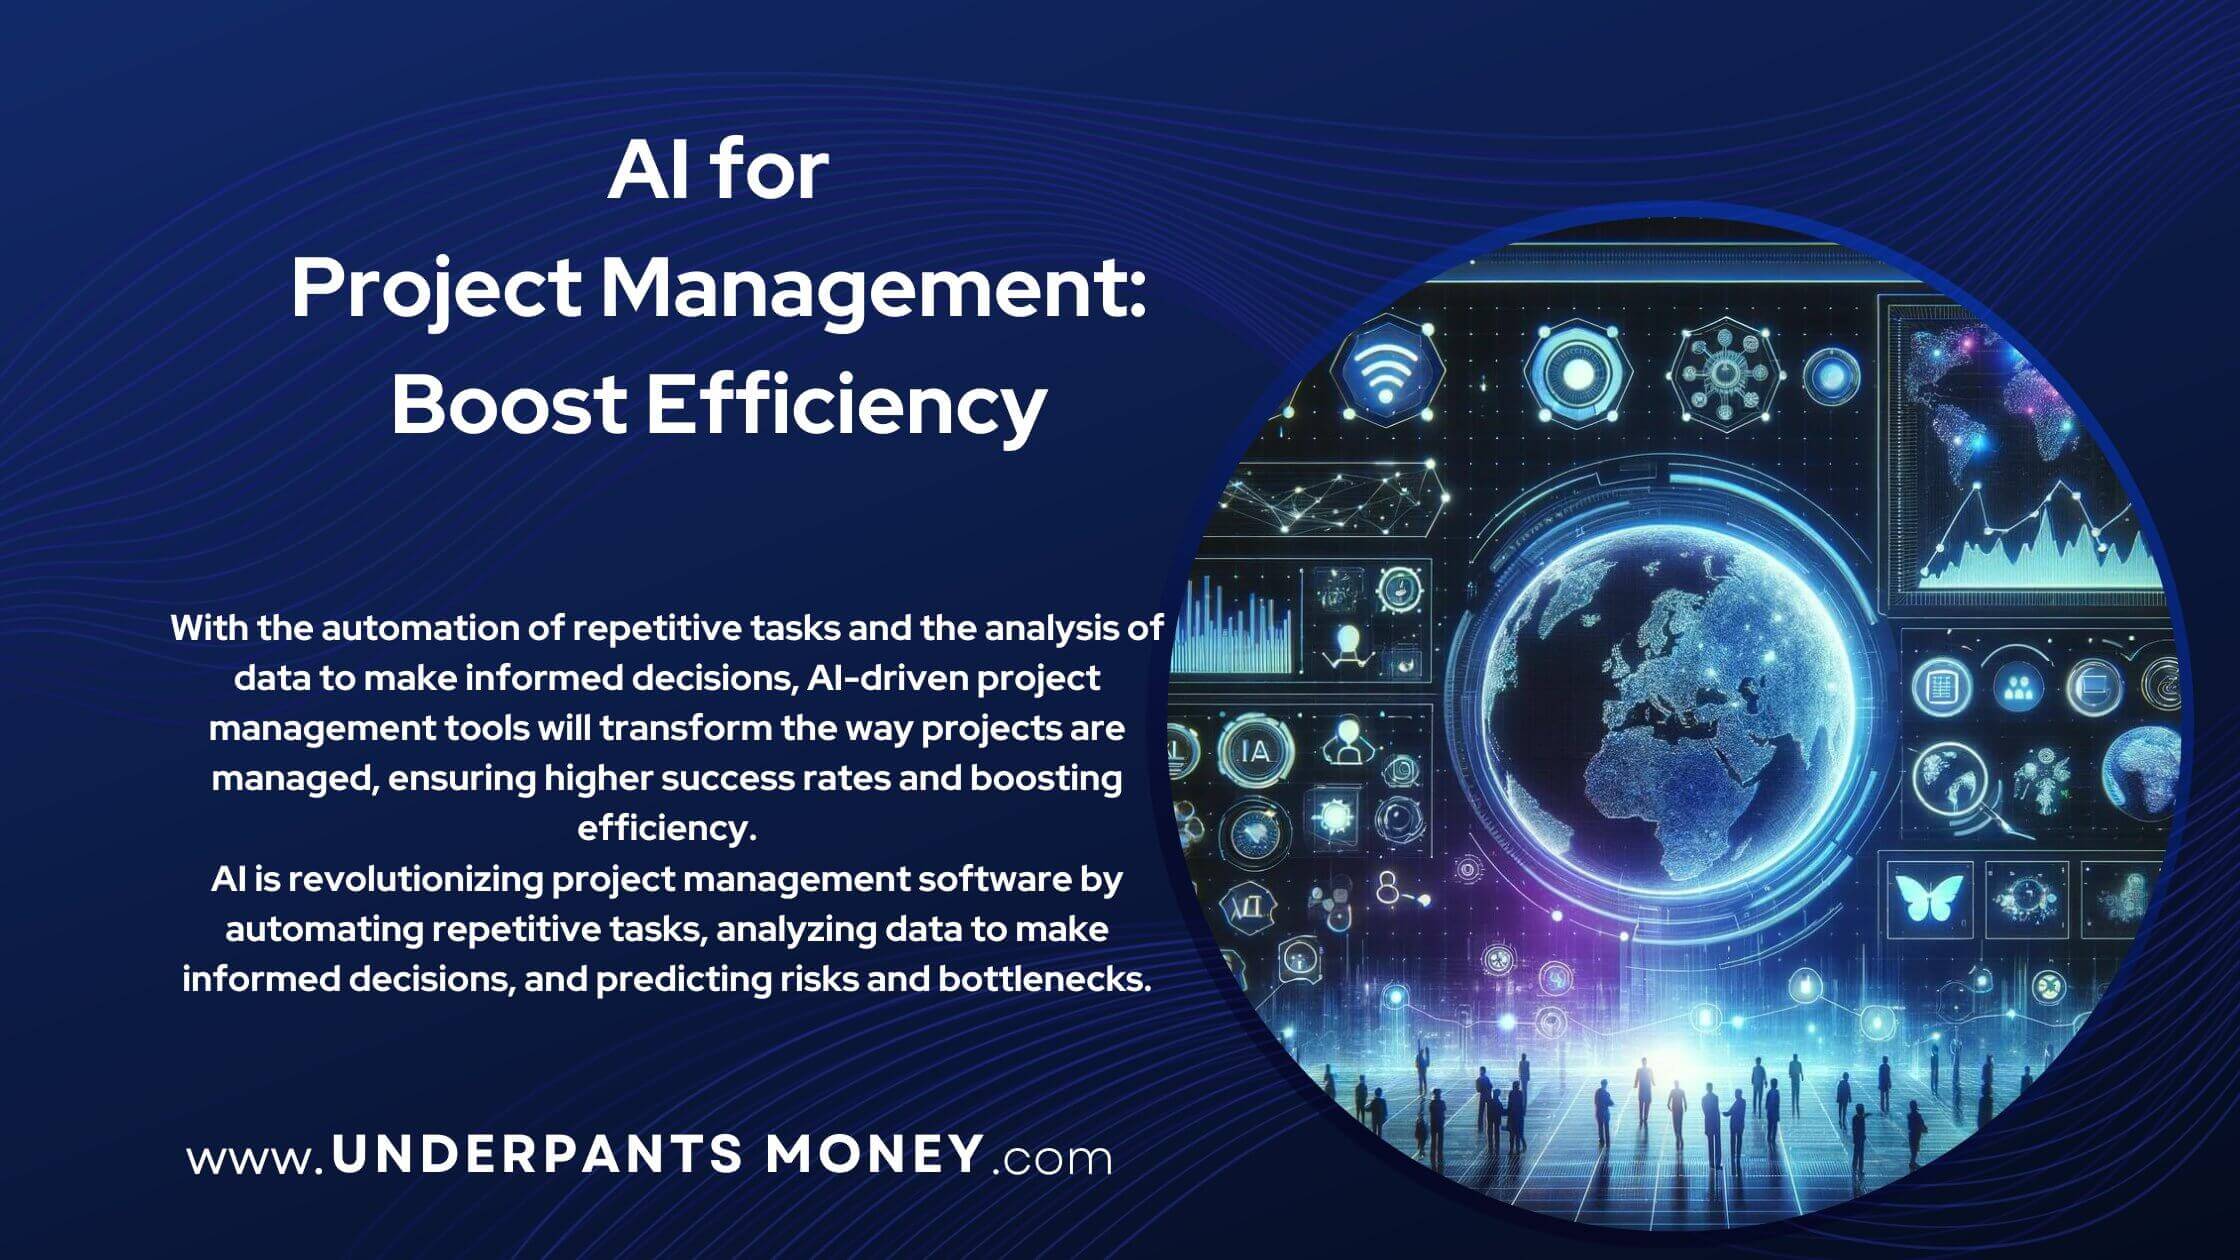 AI for project management title and description on blue with image of project management AI to the right